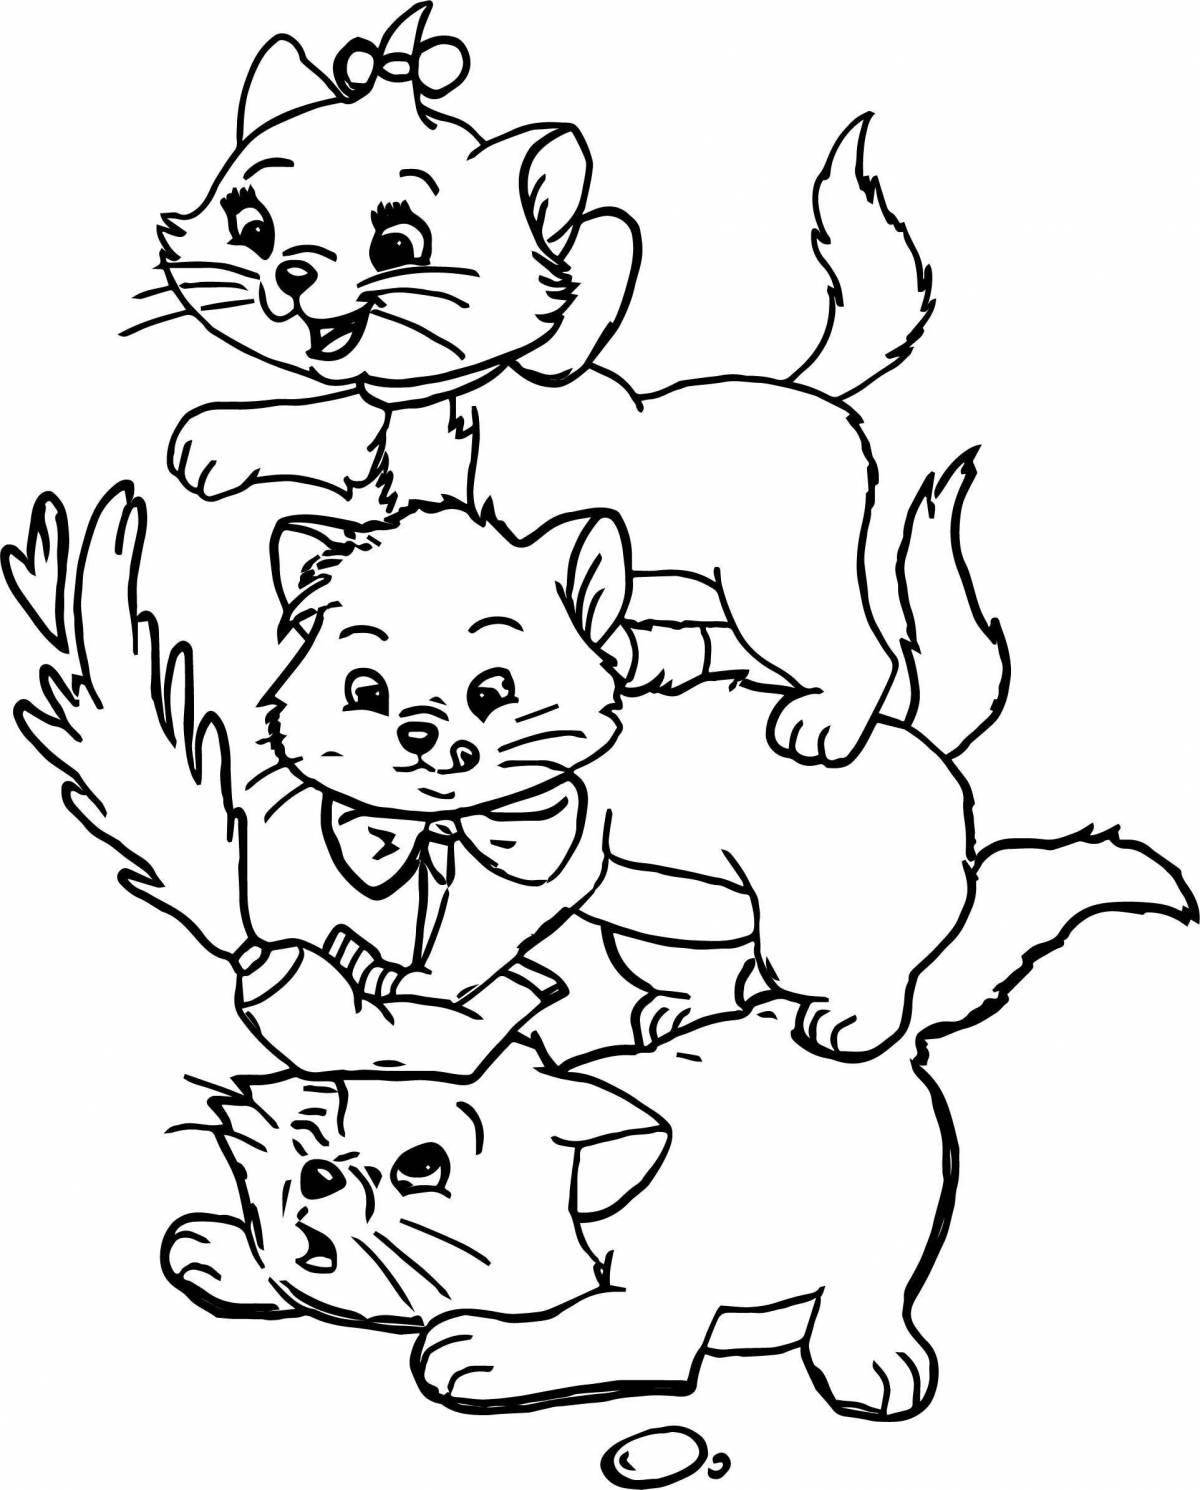 Coloring book smiling cat and puppy